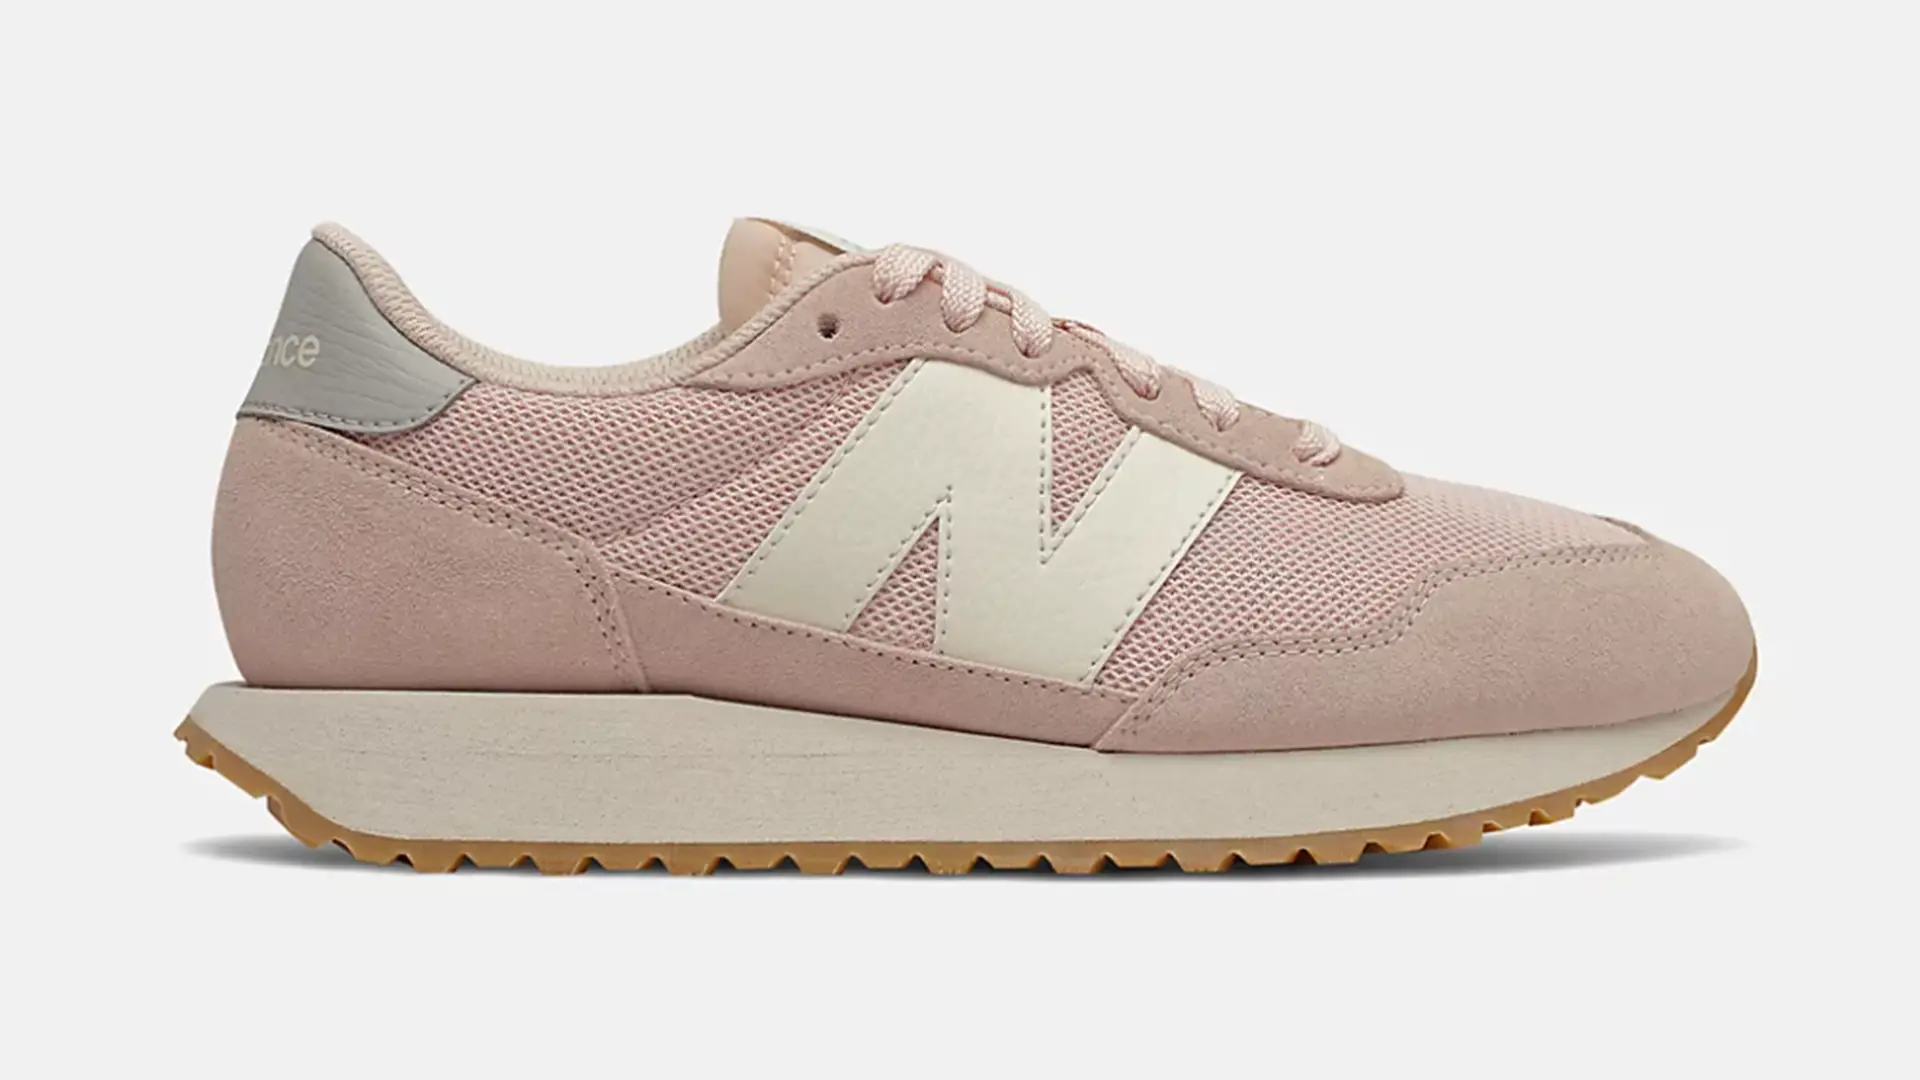 Get the Retro Look for Less with an Extra 15% Off at New Balance | The ...